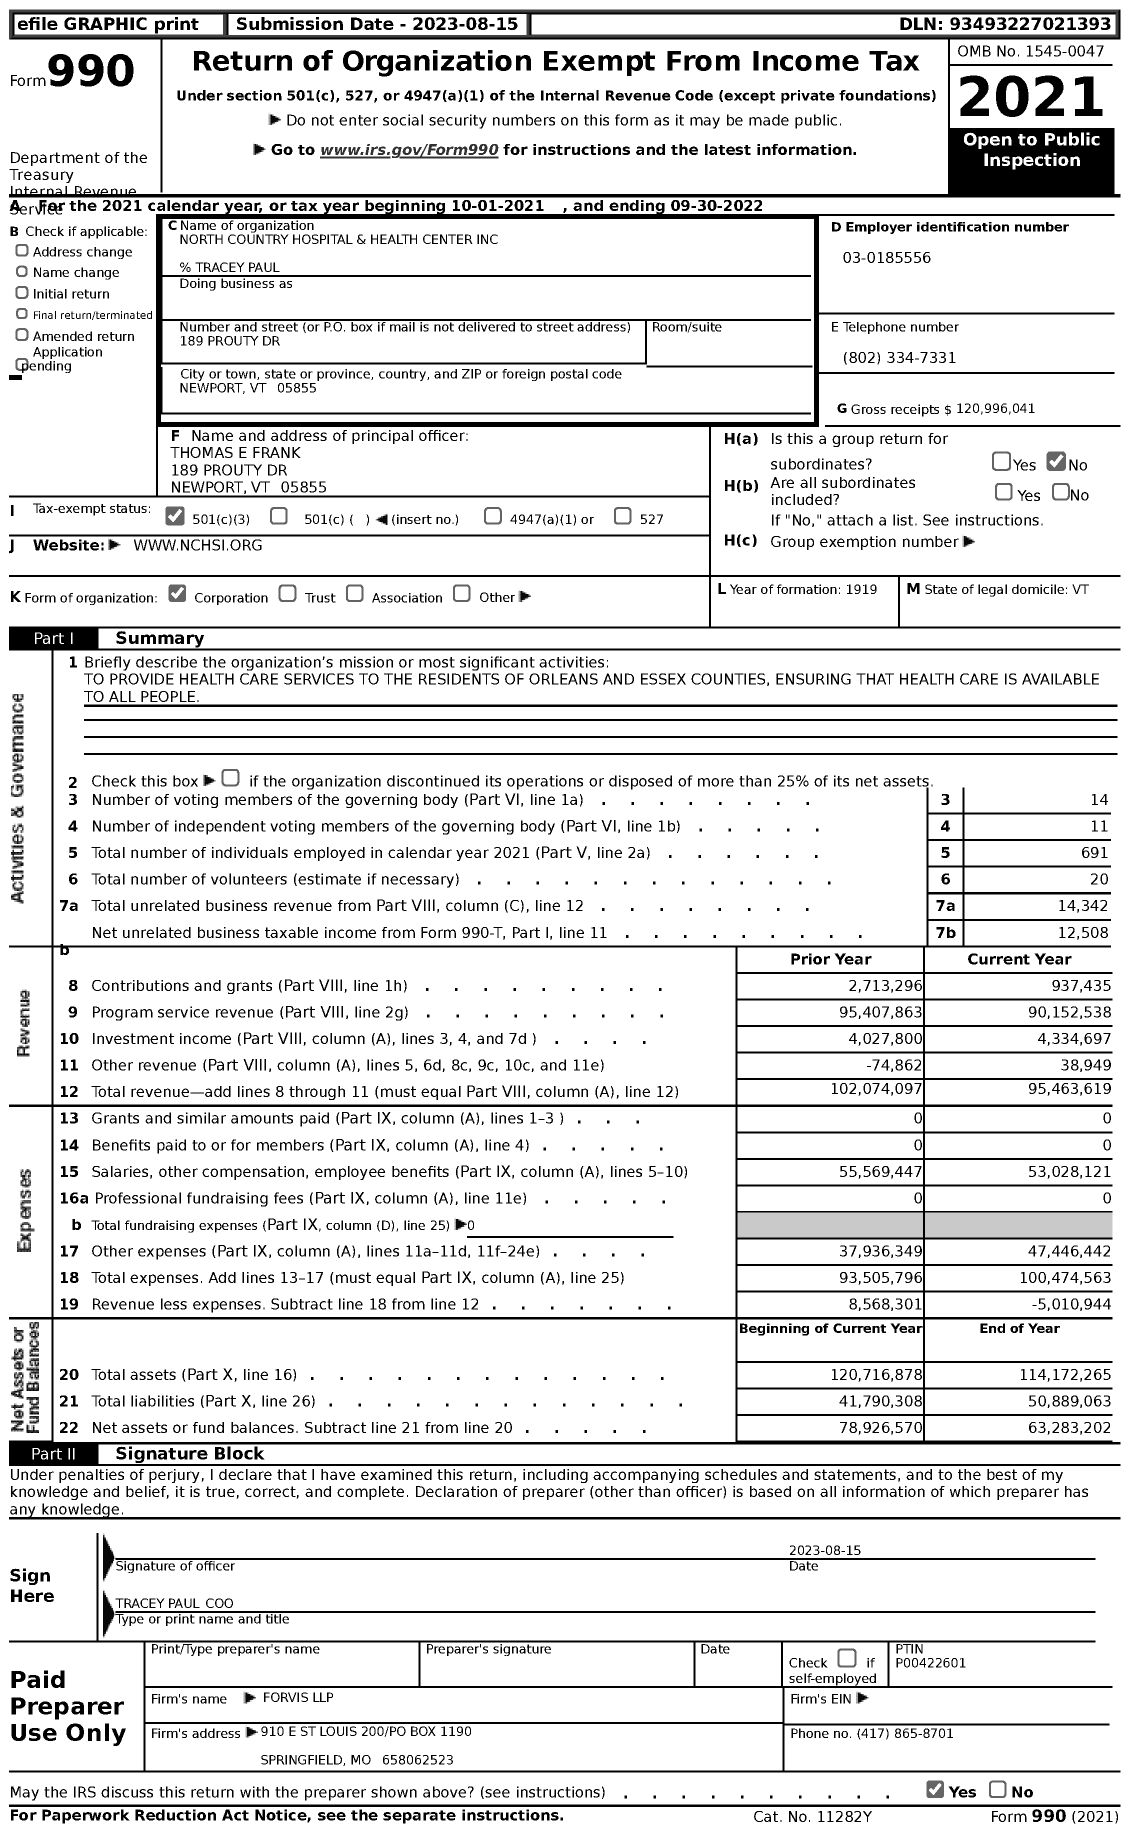 Image of first page of 2021 Form 990 for North Country Hospital & Health Center (NCH)